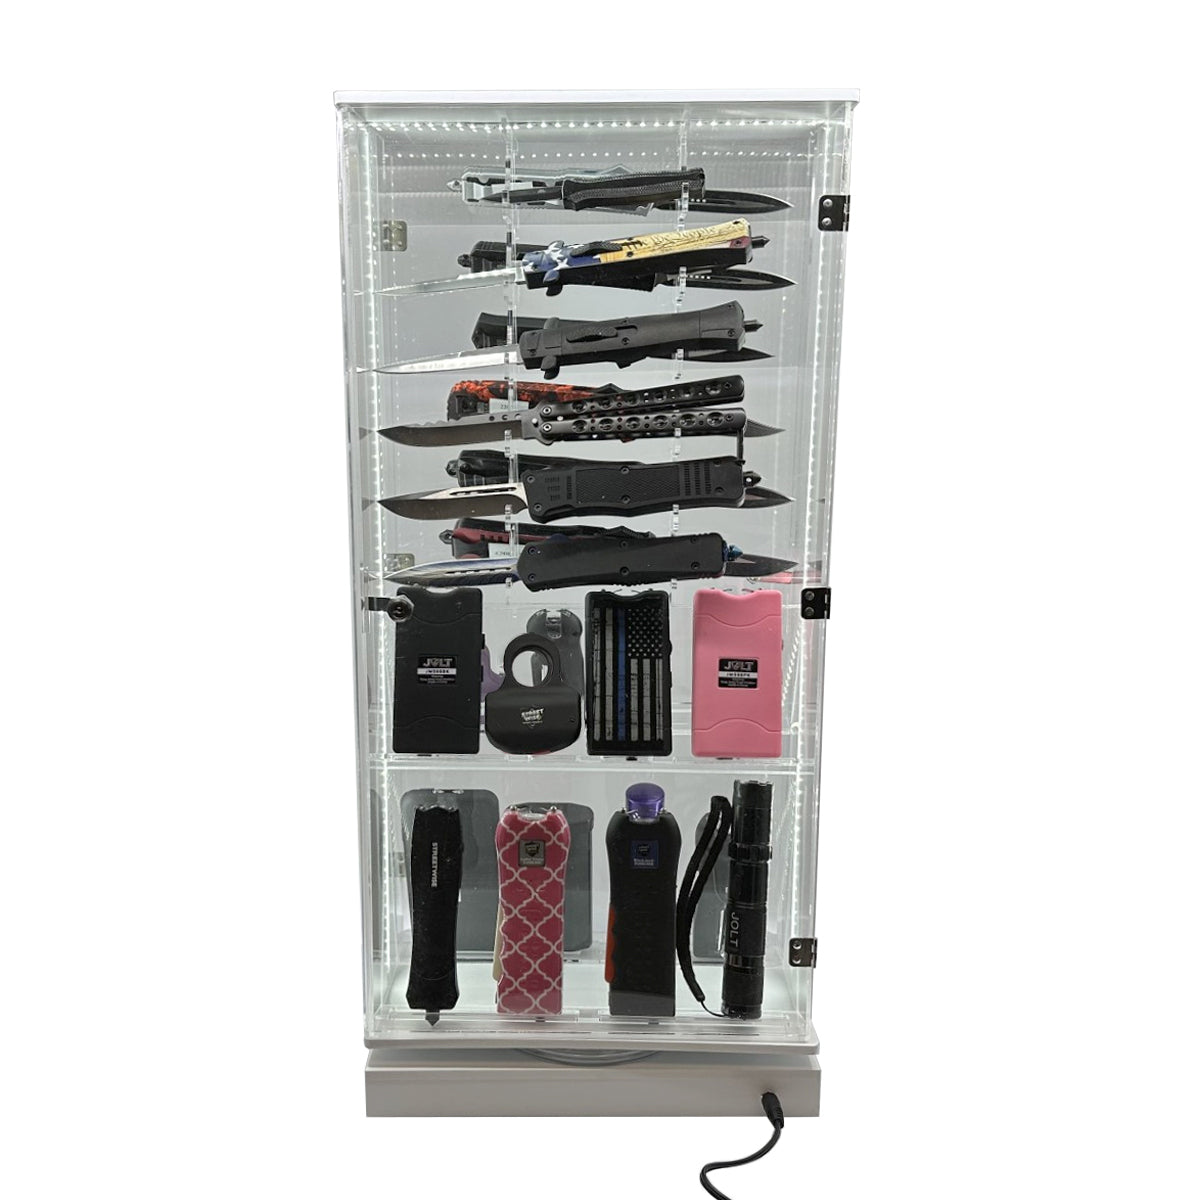 Streetwise 2 Sided Rotating LED Display with 12 Standard Knives and 16 Stun Guns